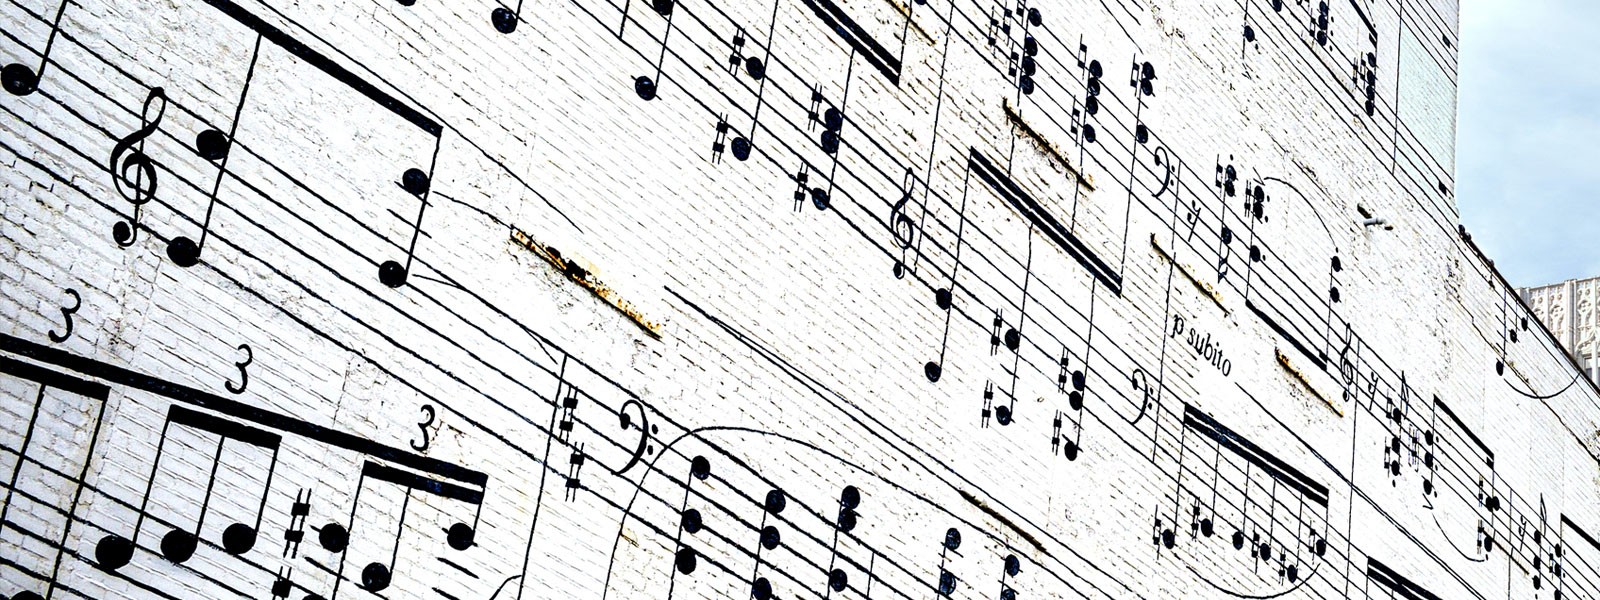 Music painted on a wall